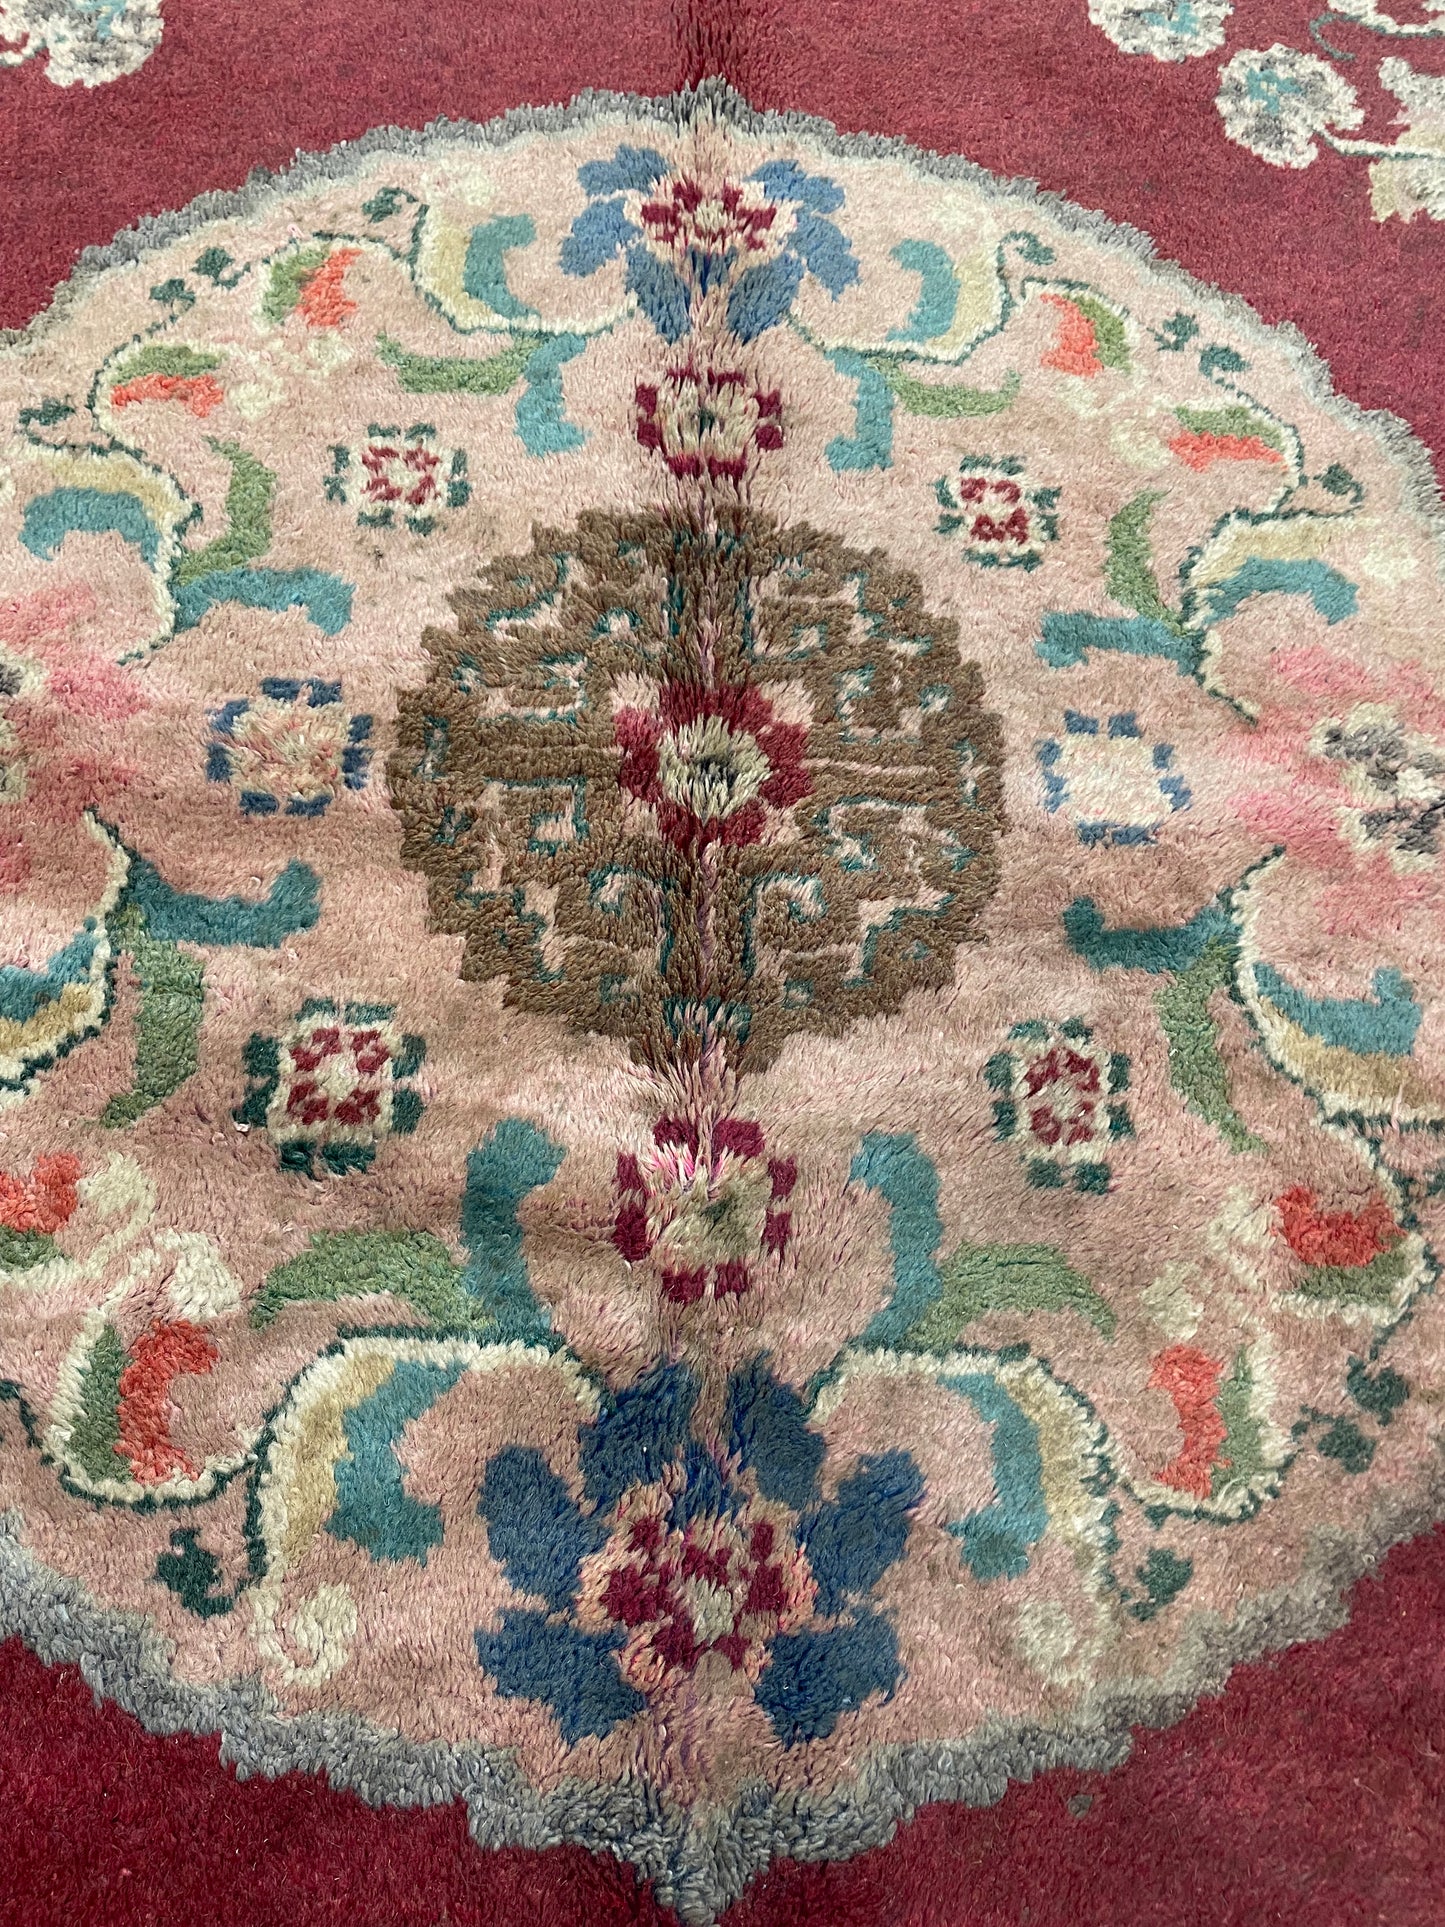 Hand-Knotted Wool Rug Mongolian 4'10" x 6'3"